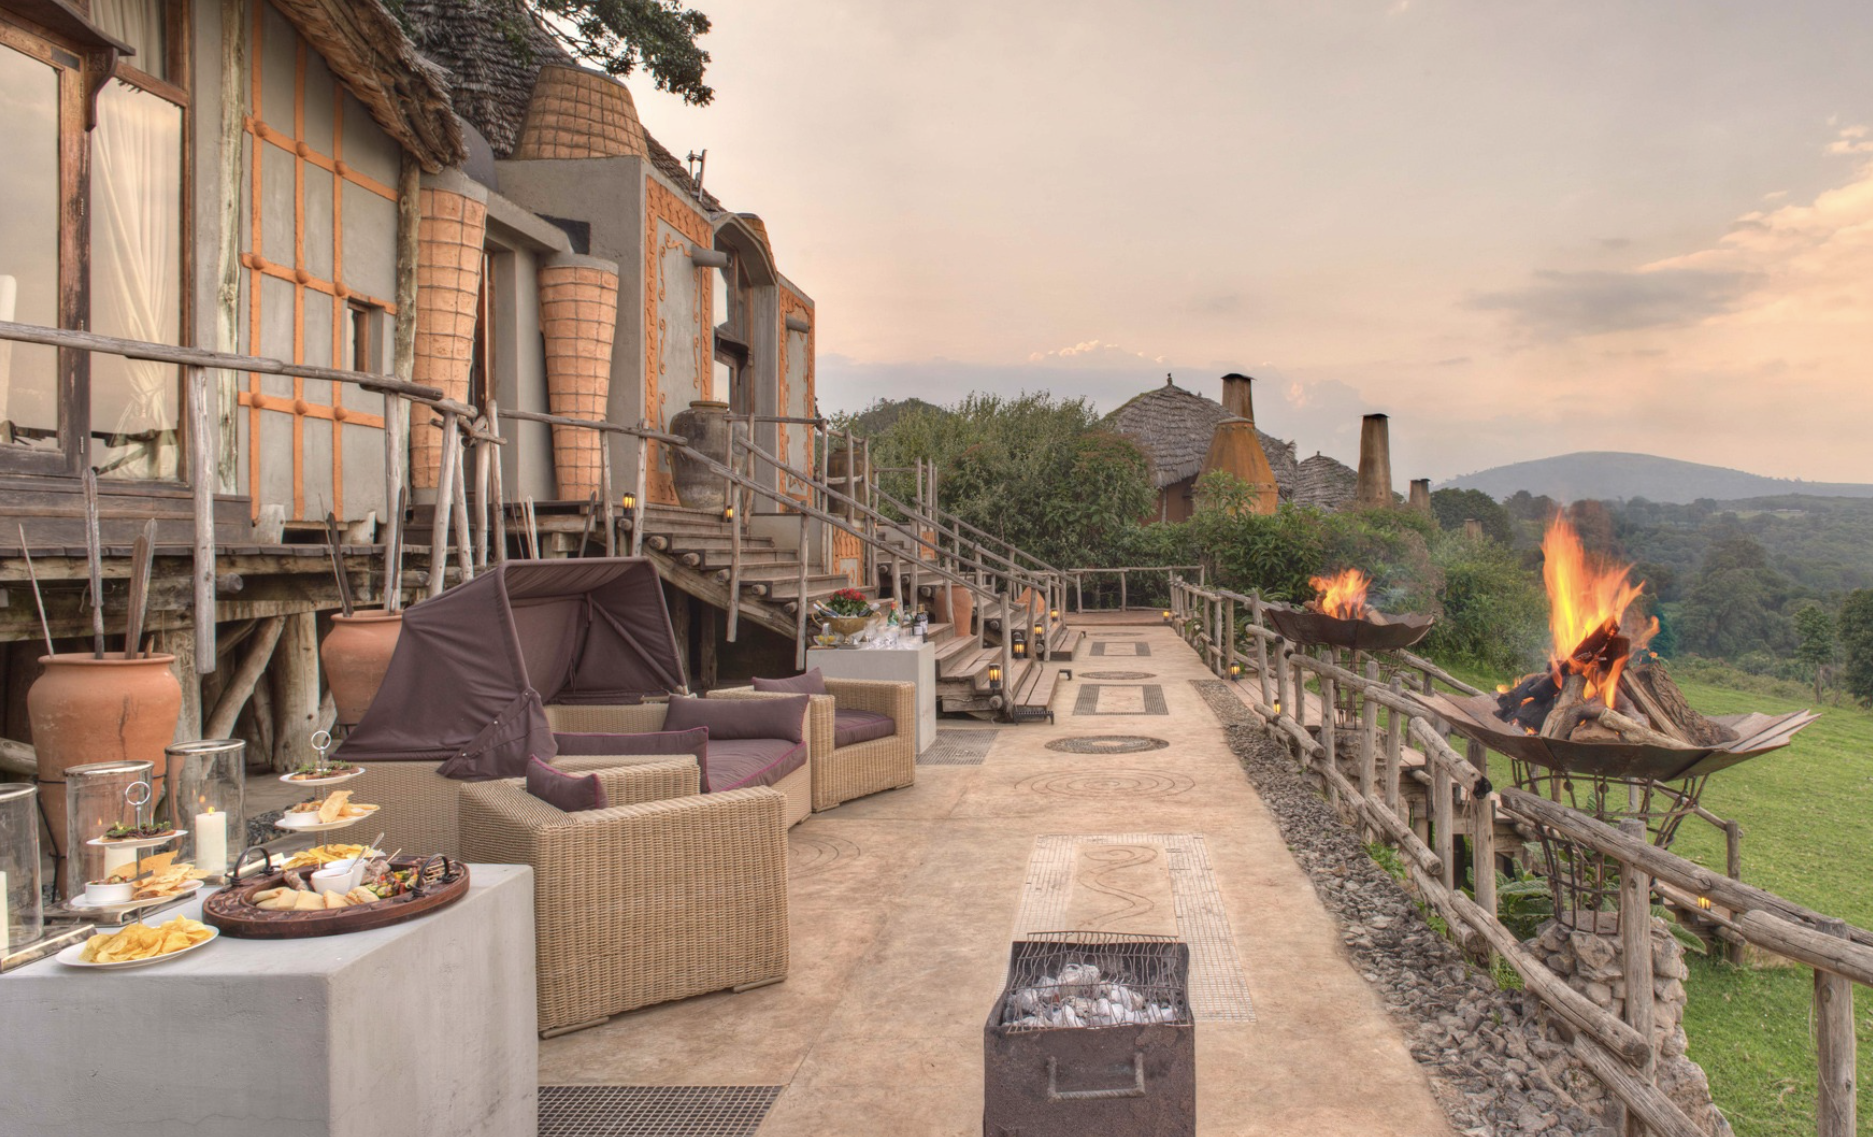 Outdoor space at the andBeyond Ngorongoro Crater Lodge in Tanzania, Africa